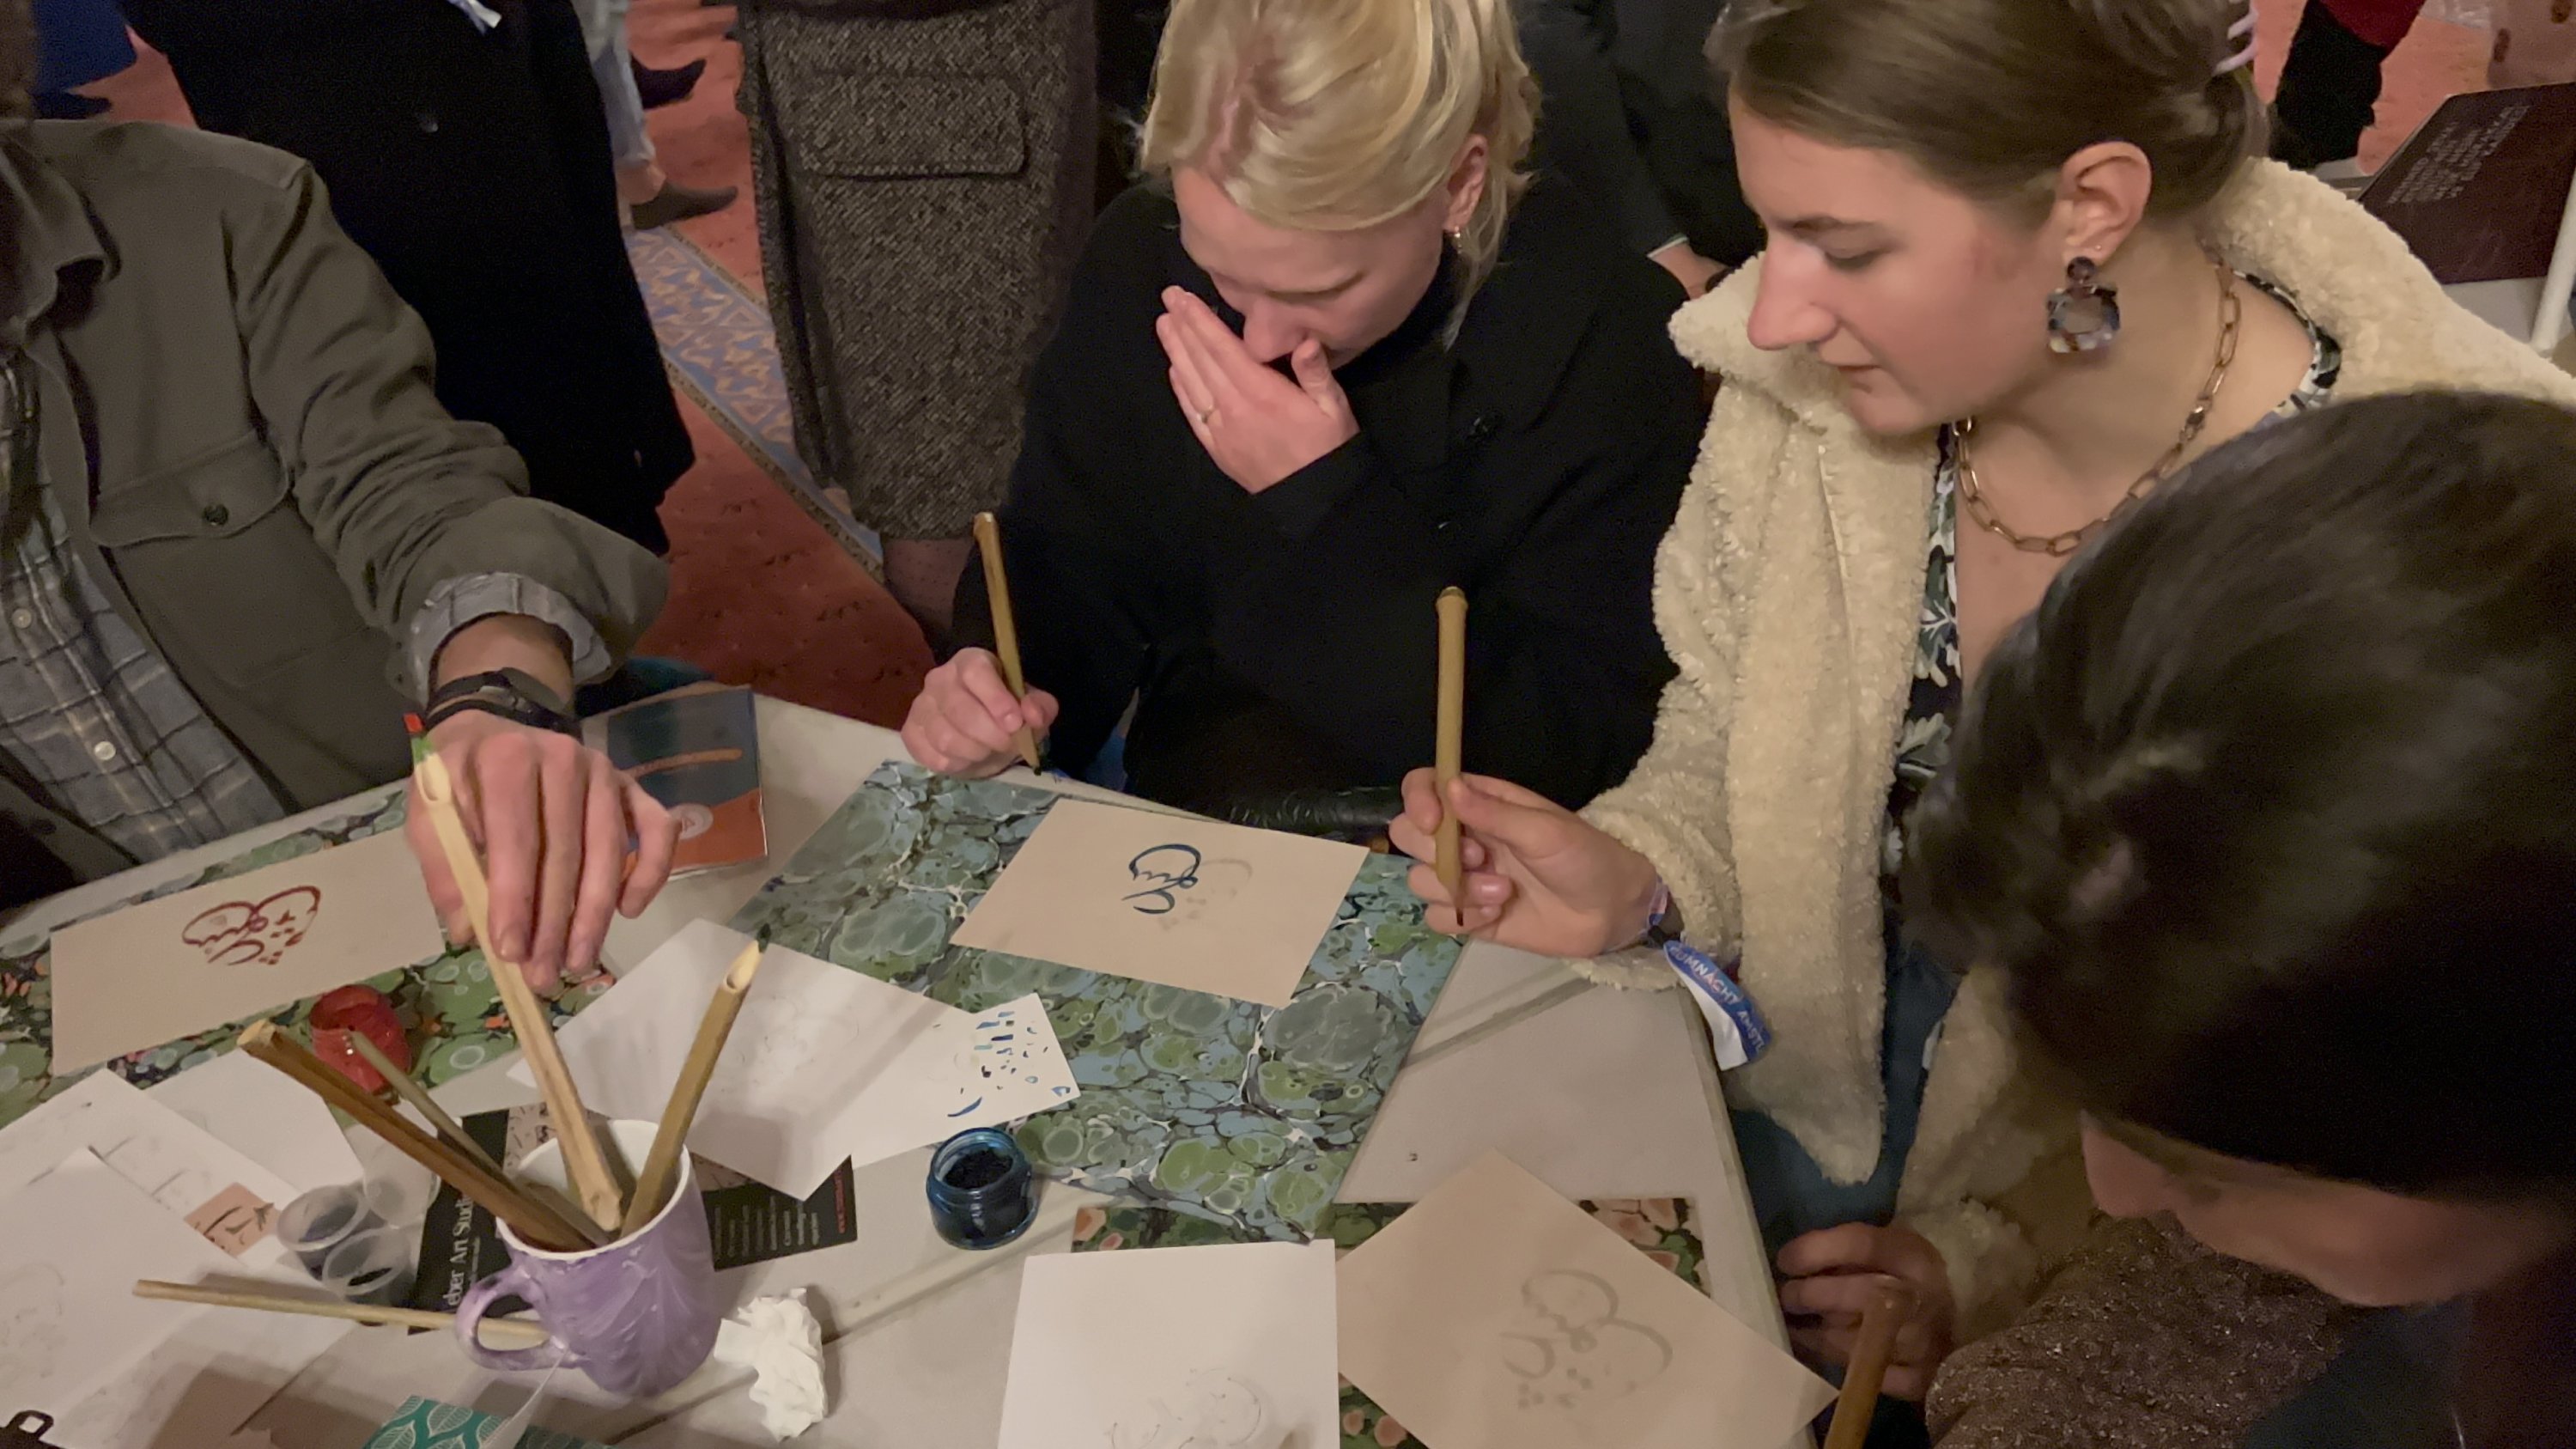 Visitors learn about marbling art at the Fatih Mosque in Amsterdam as part of the 